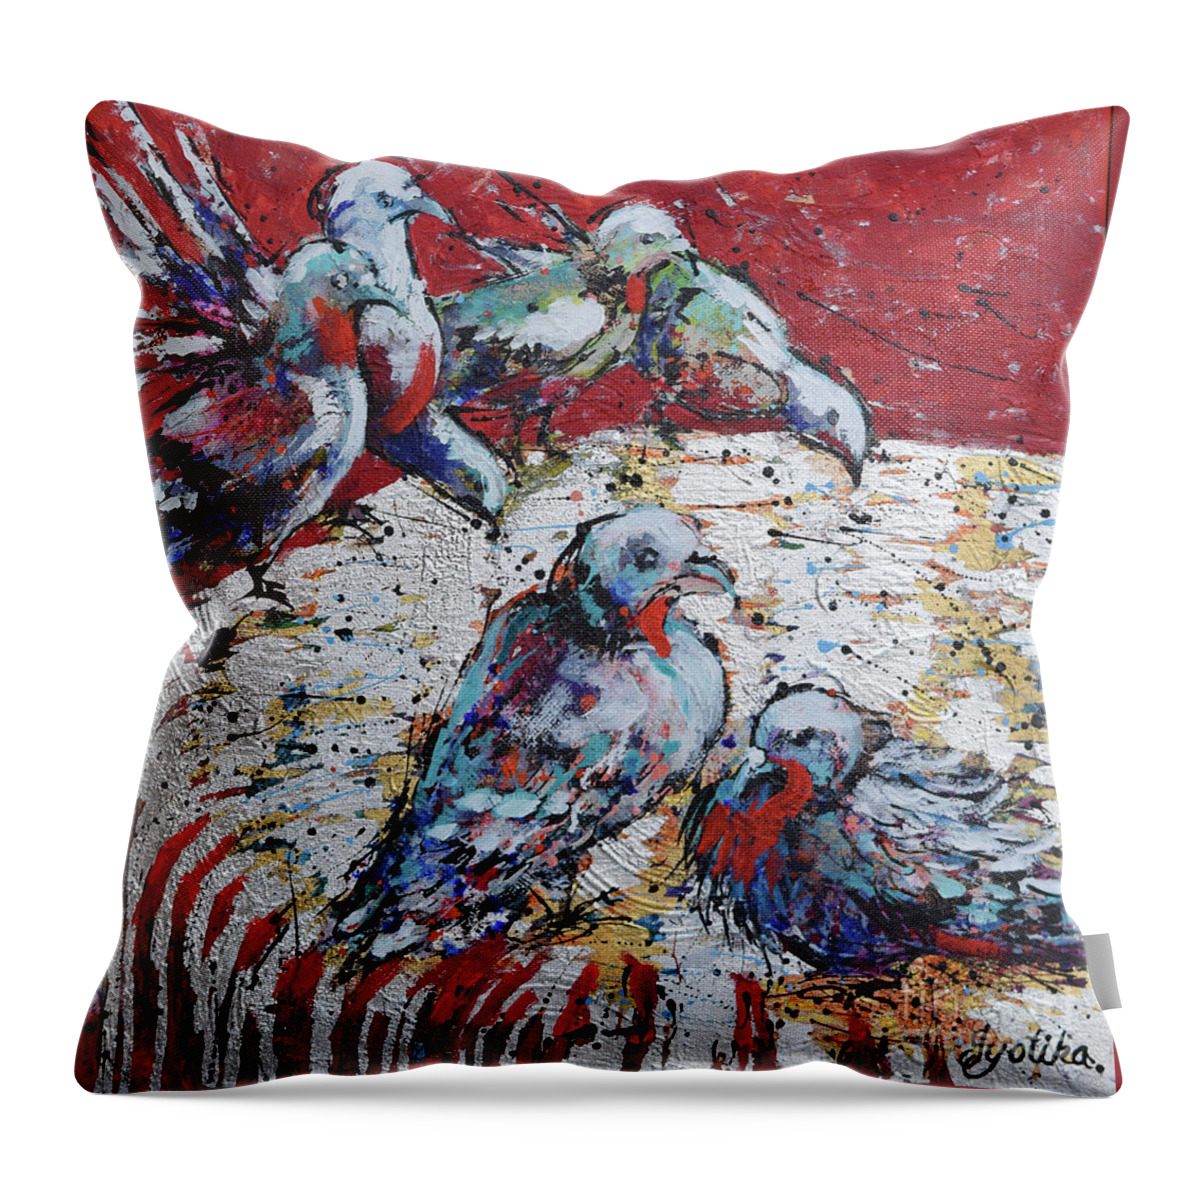 Bathe Throw Pillow featuring the painting Quenching Thirst by Jyotika Shroff